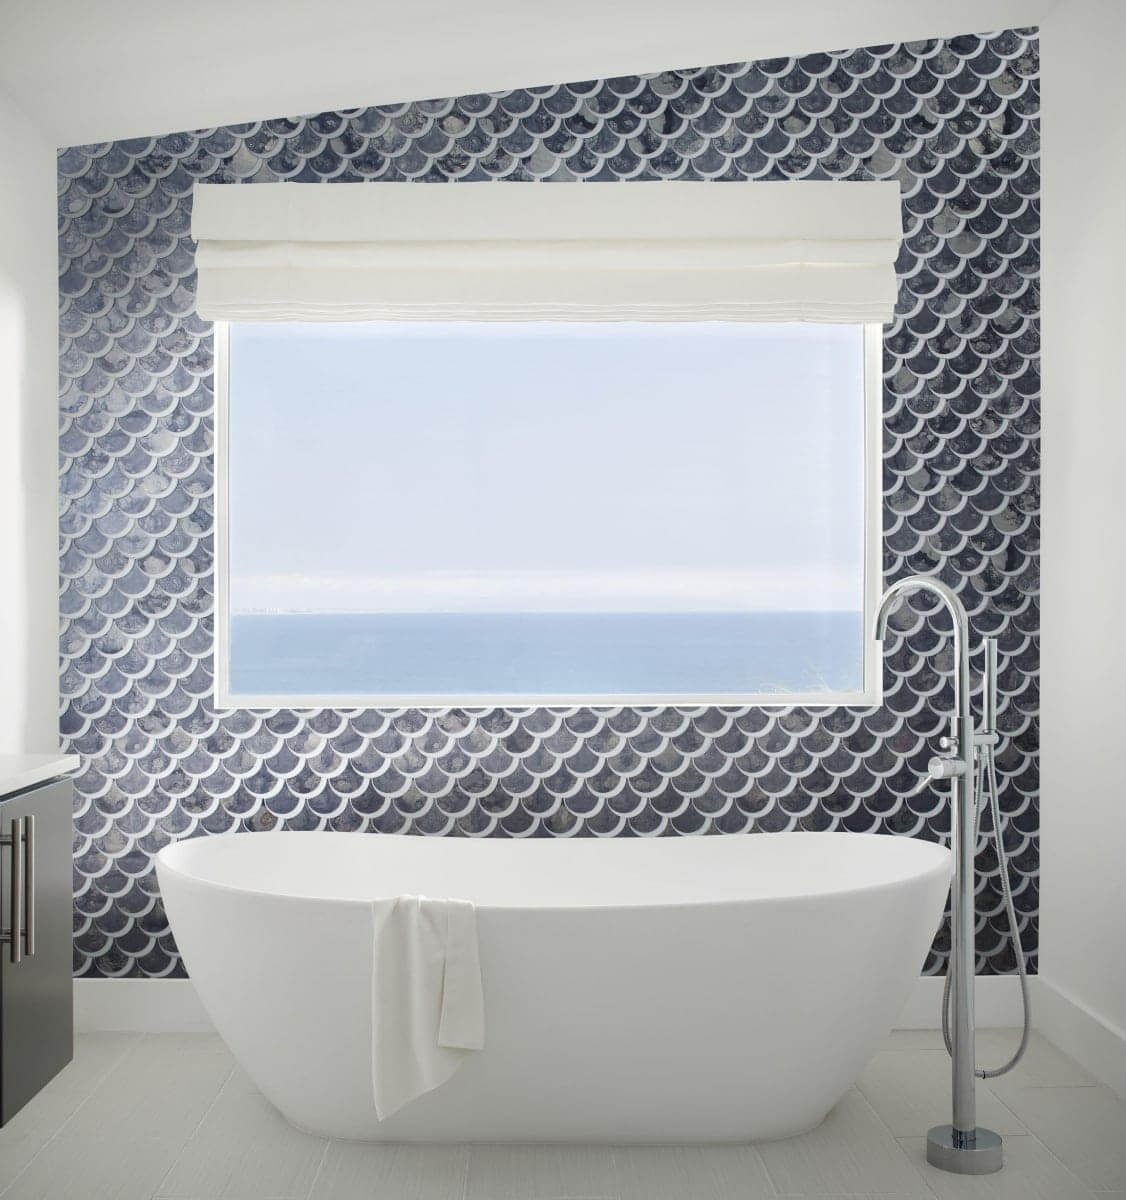 Glass tiles used in a bathroom